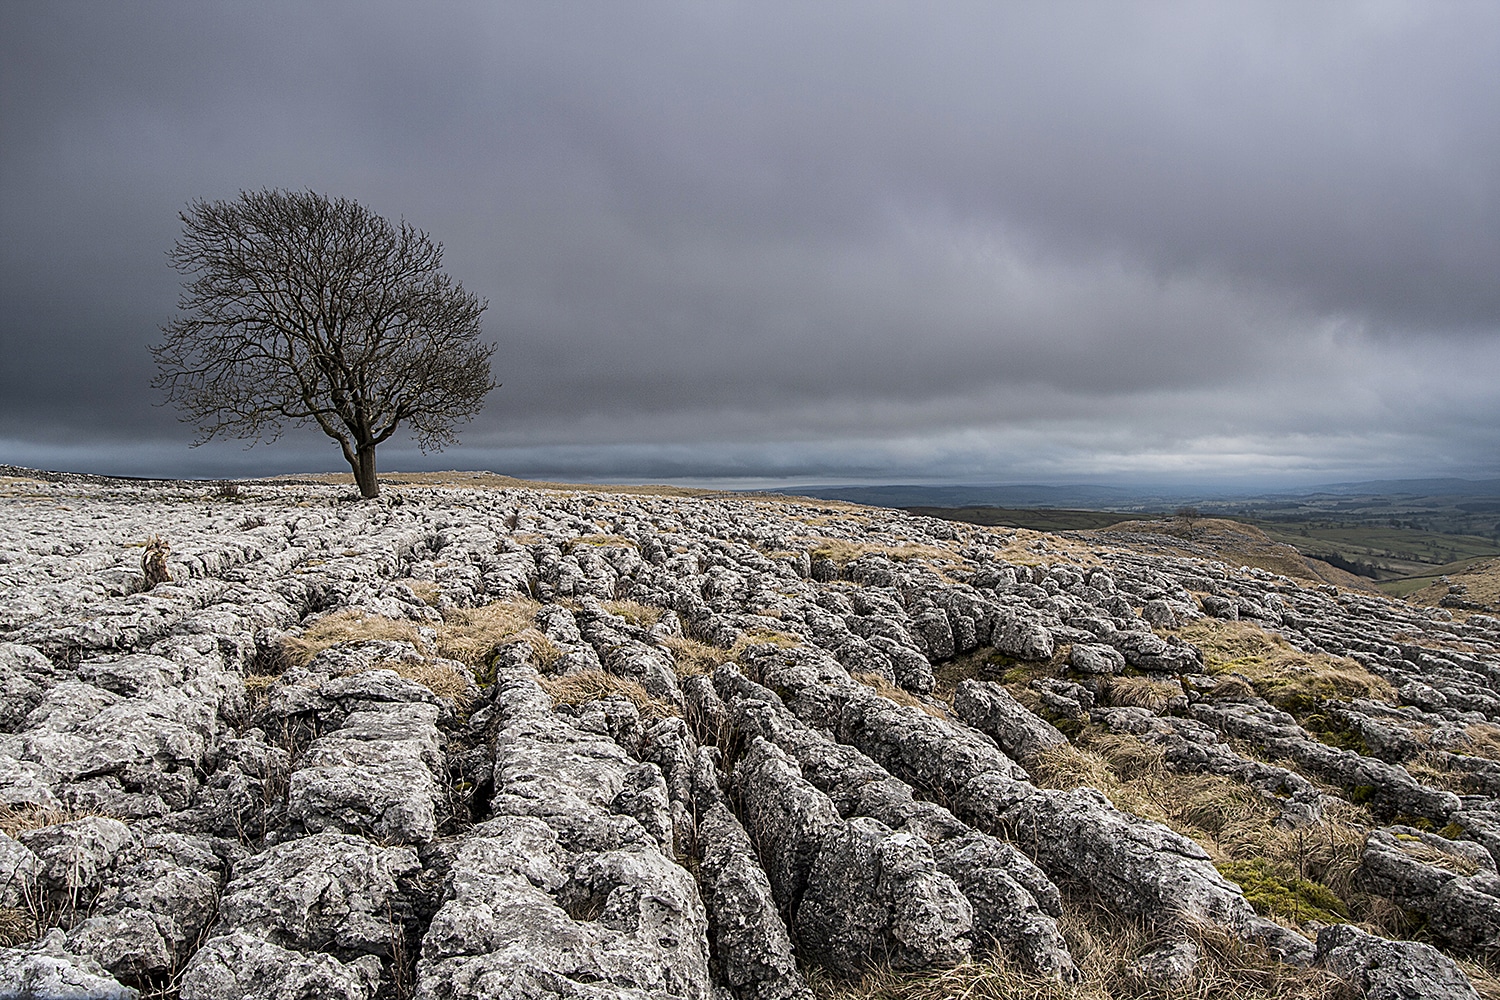 ‘The Tree’ Malham, Yorkshire Yorkshire Landscapes Clouds 2